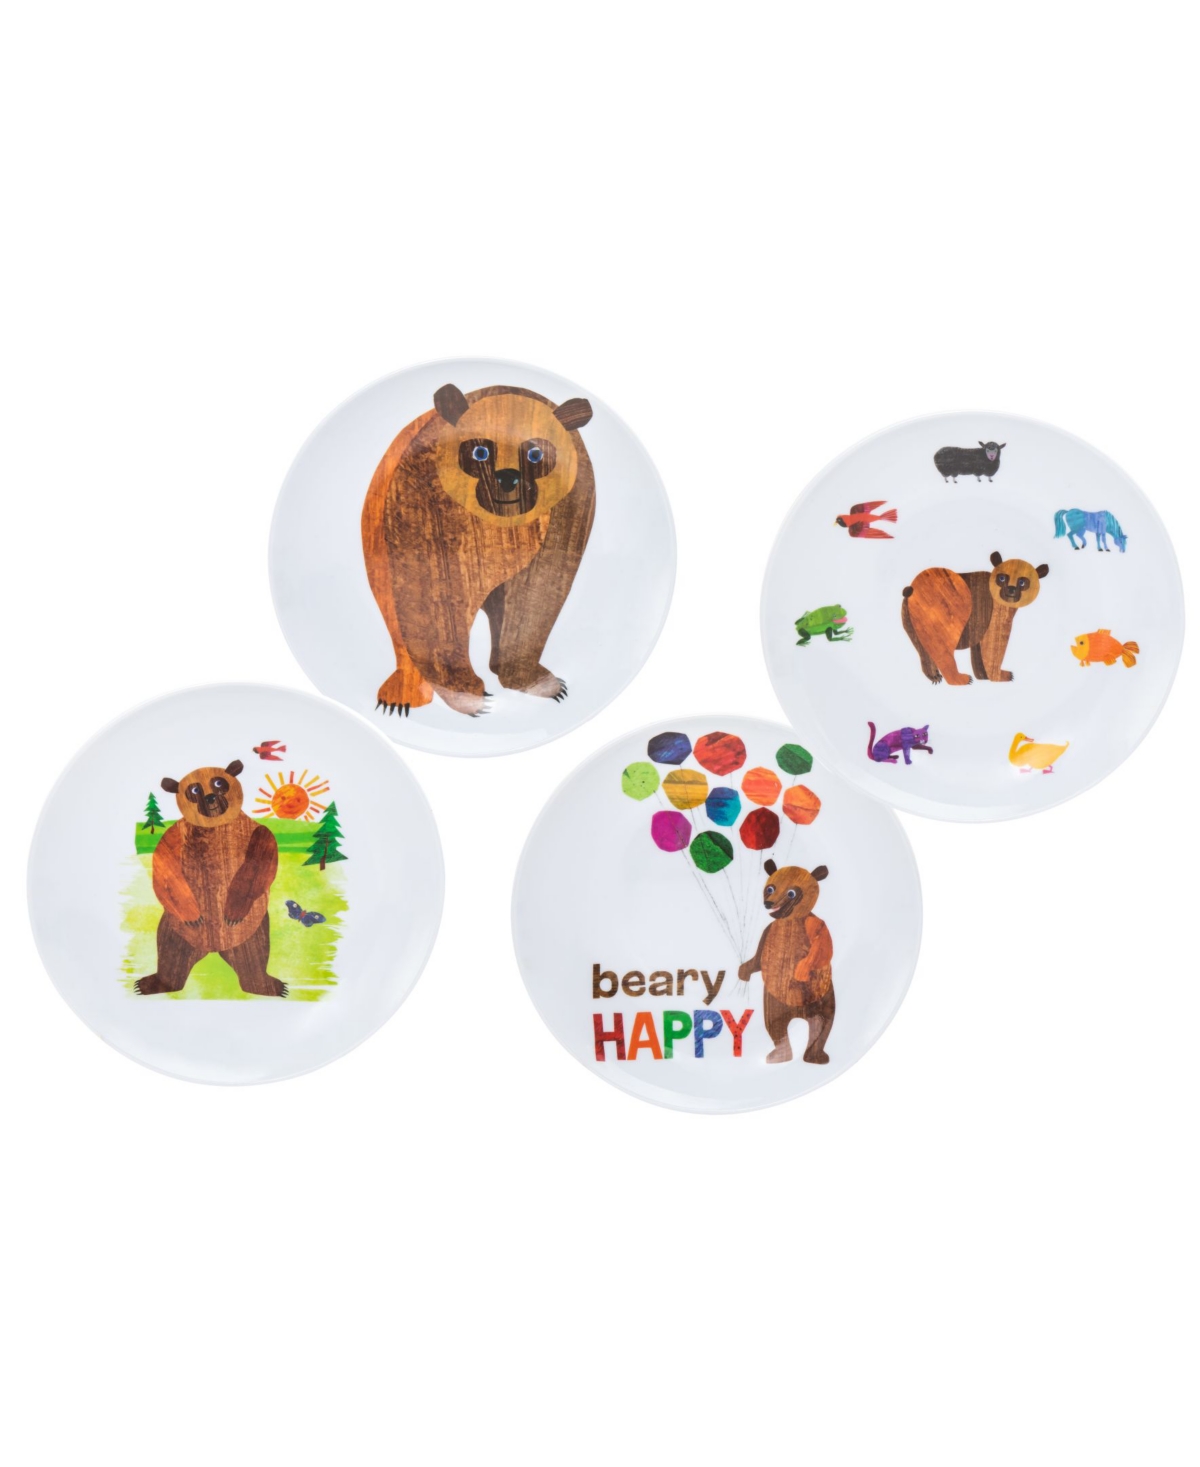 The World of Eric Carle, Brown Bear Plate, Set of 4 - White